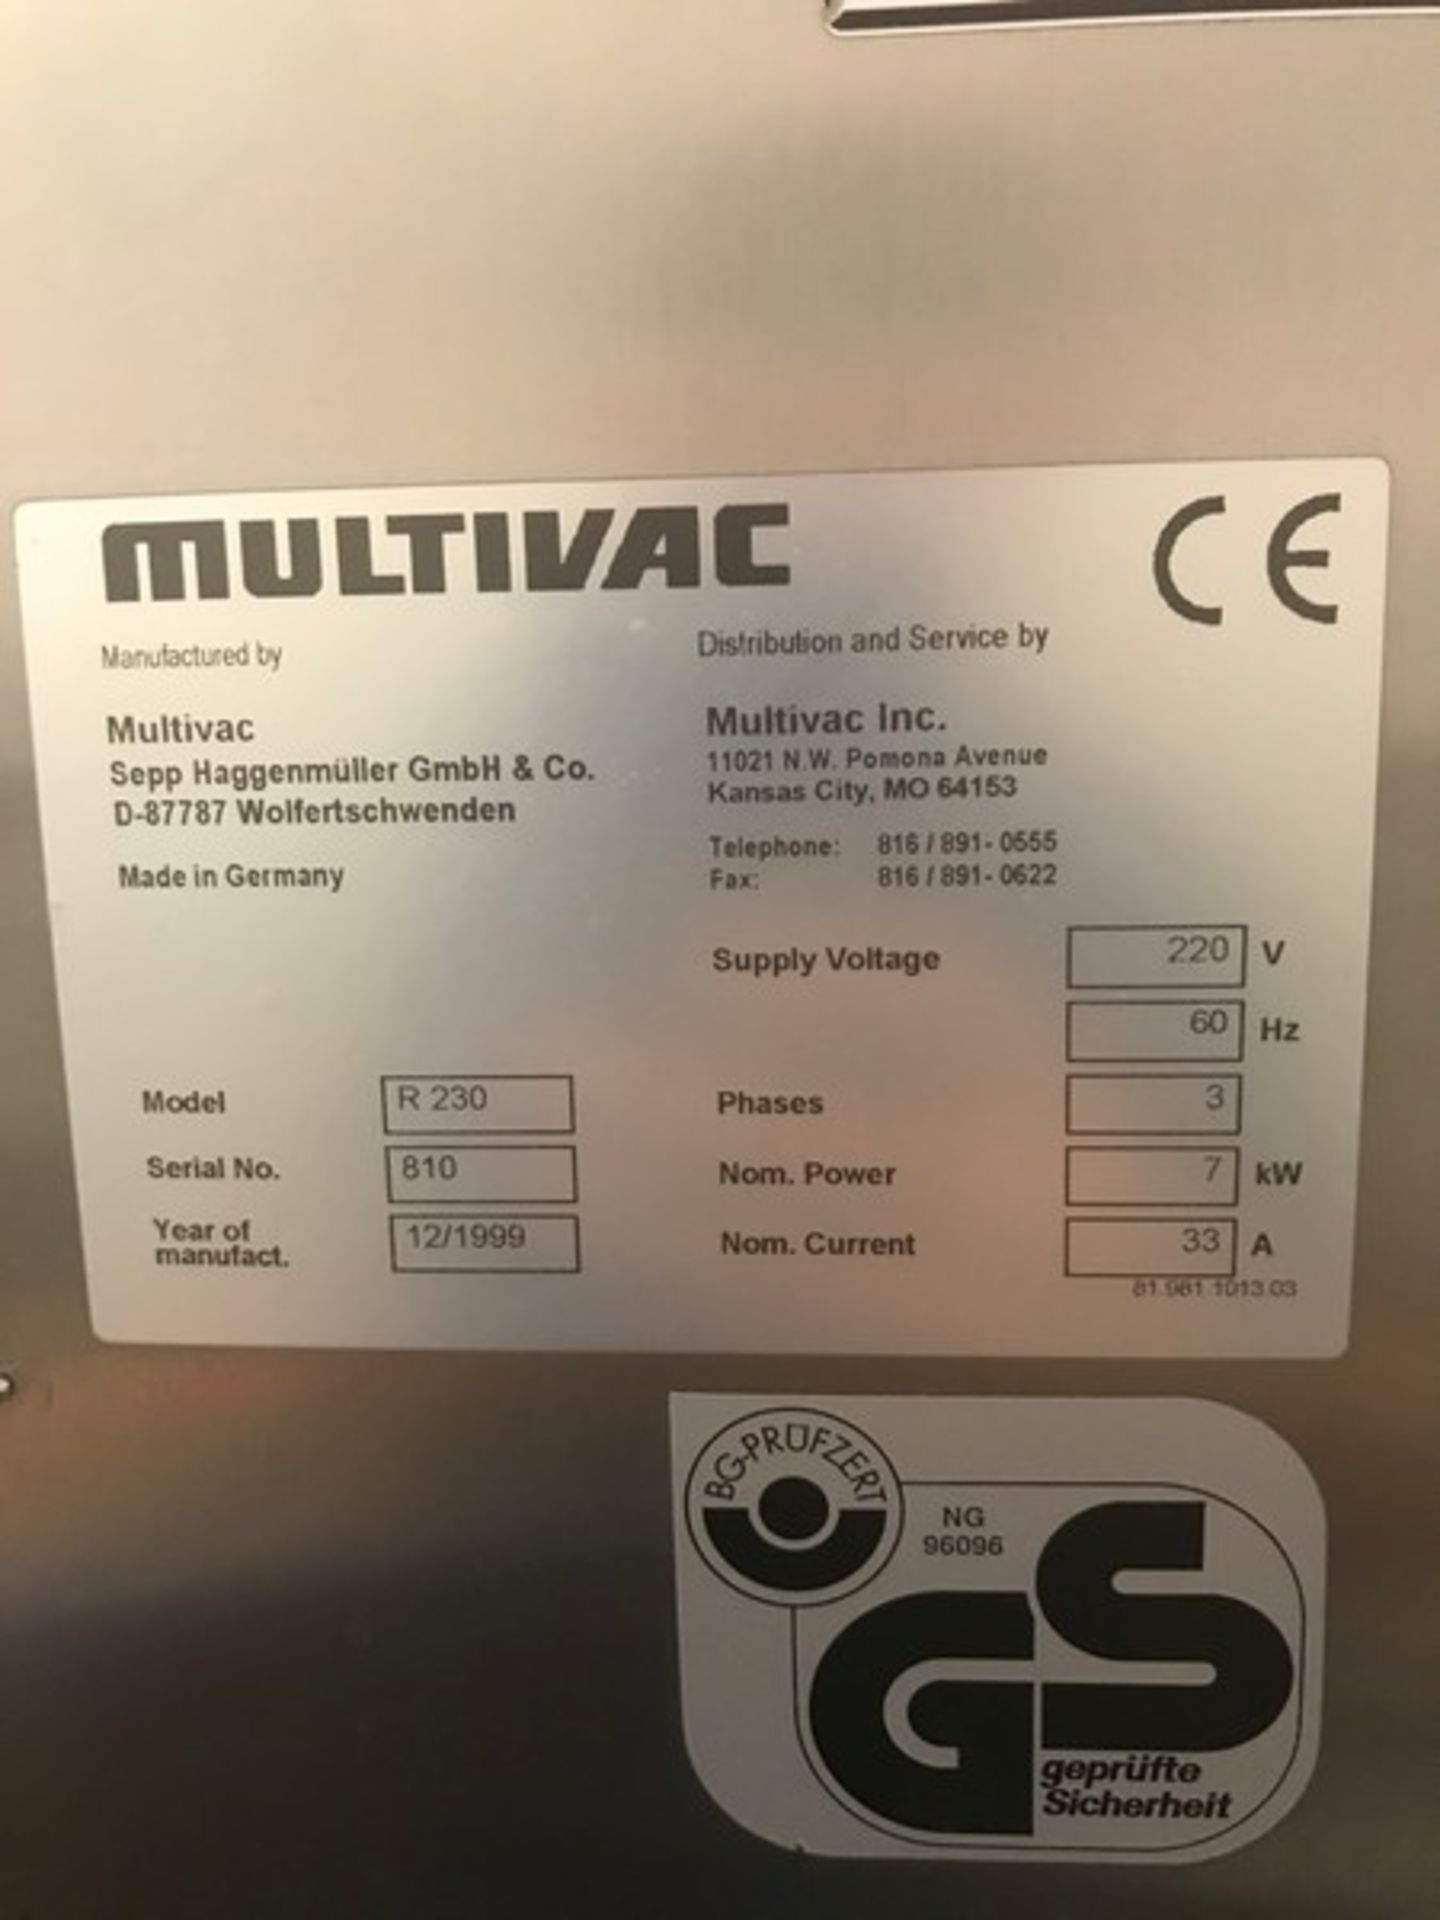 Multivac Vacuum Packaging Machine, Model R230, S/N 810, 220 V/60 Hz (1999) (Unit #96) (Located New - Image 7 of 7